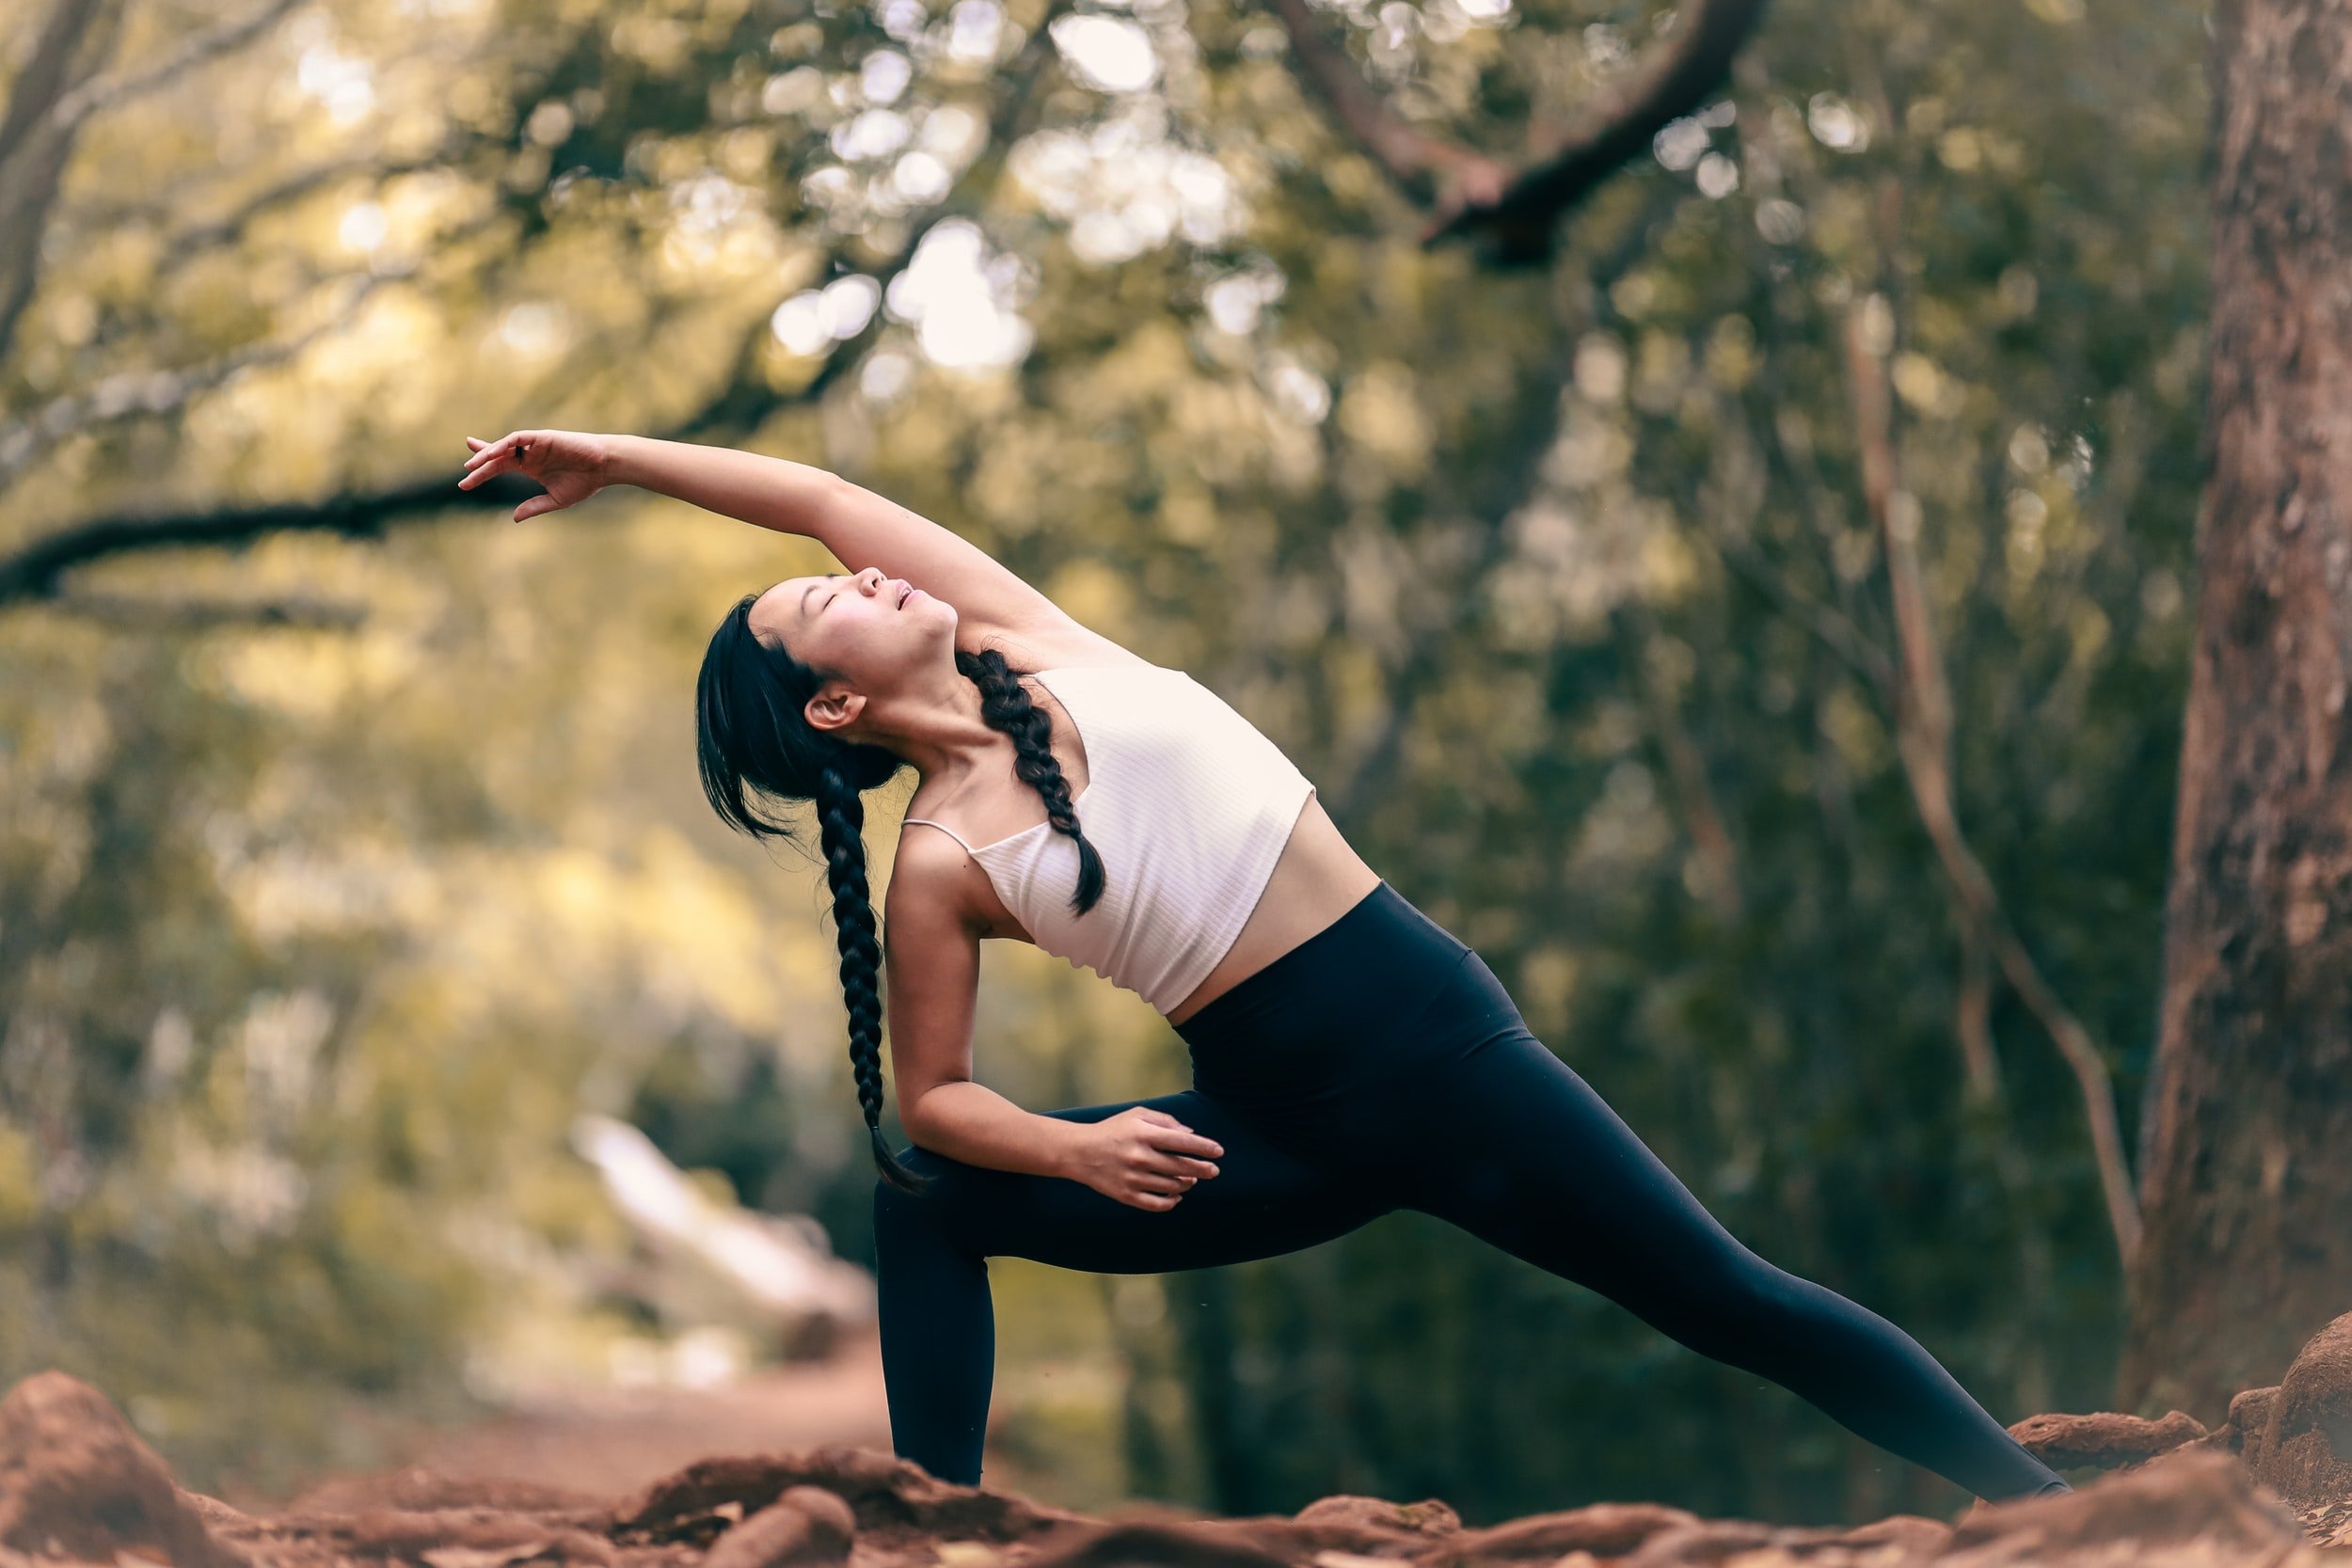 Can Yoga Really Rinse Out Your Organs? — Winding Road Yoga